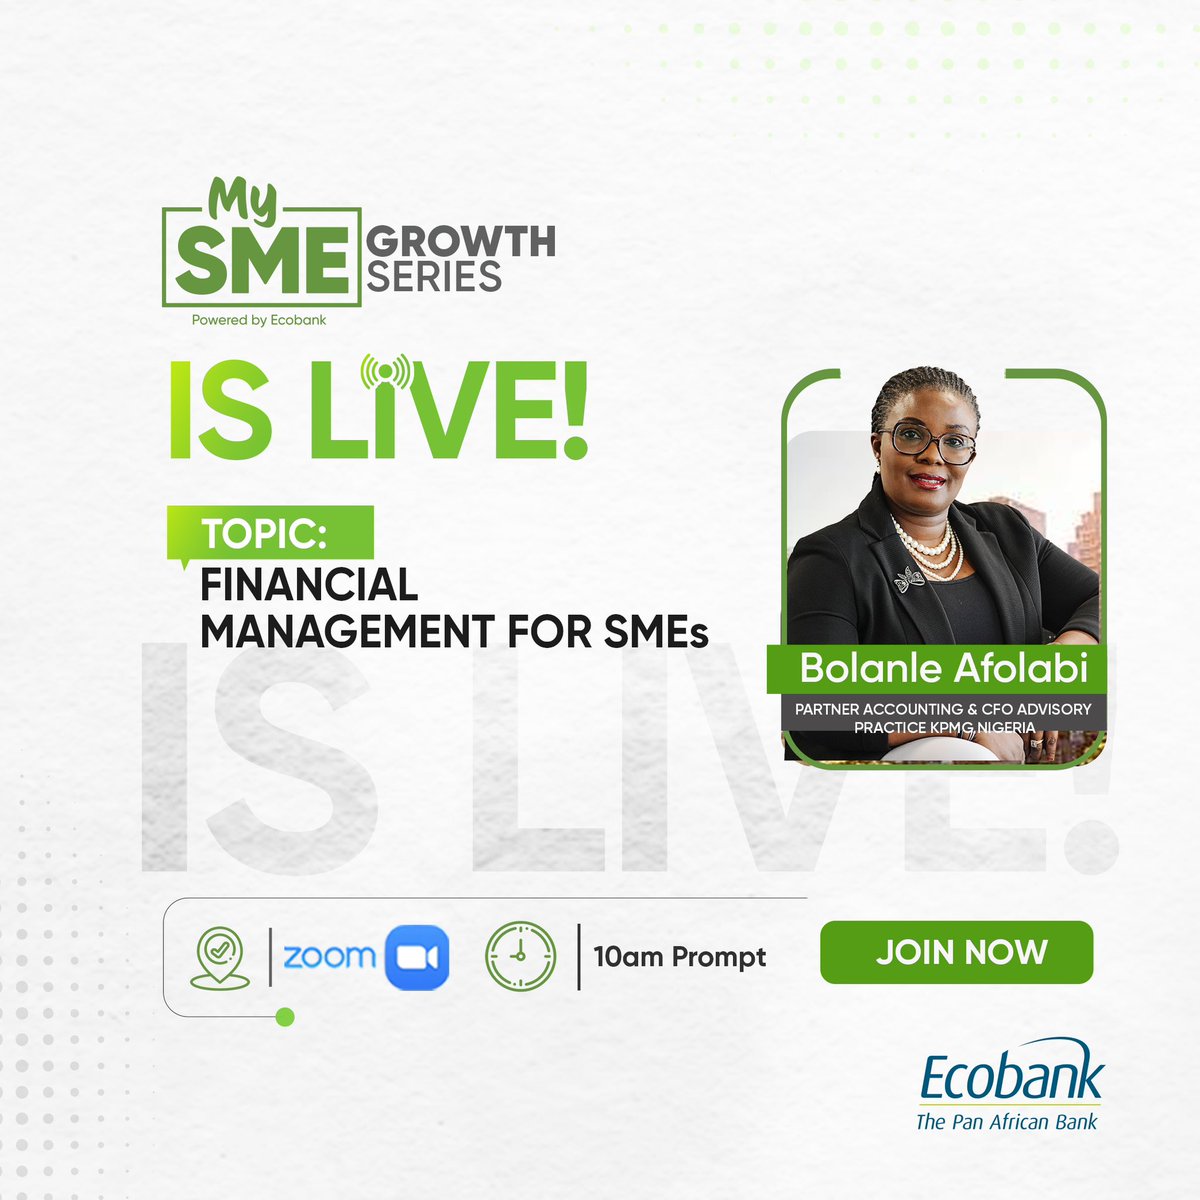 We are live!

Join us now on MySME series with Bolanle Afolabi {Partner Accounting & CFO Advisory Practice KPMG Nigeria}.⏳✨

Click the link below to join:
bit.ly/SMEGrowthSerie…

Time: 10:00am 

#mysmegrowthseries
#abetterway 
#ecobankthepanafricanbank 
#mysmegrowthseries